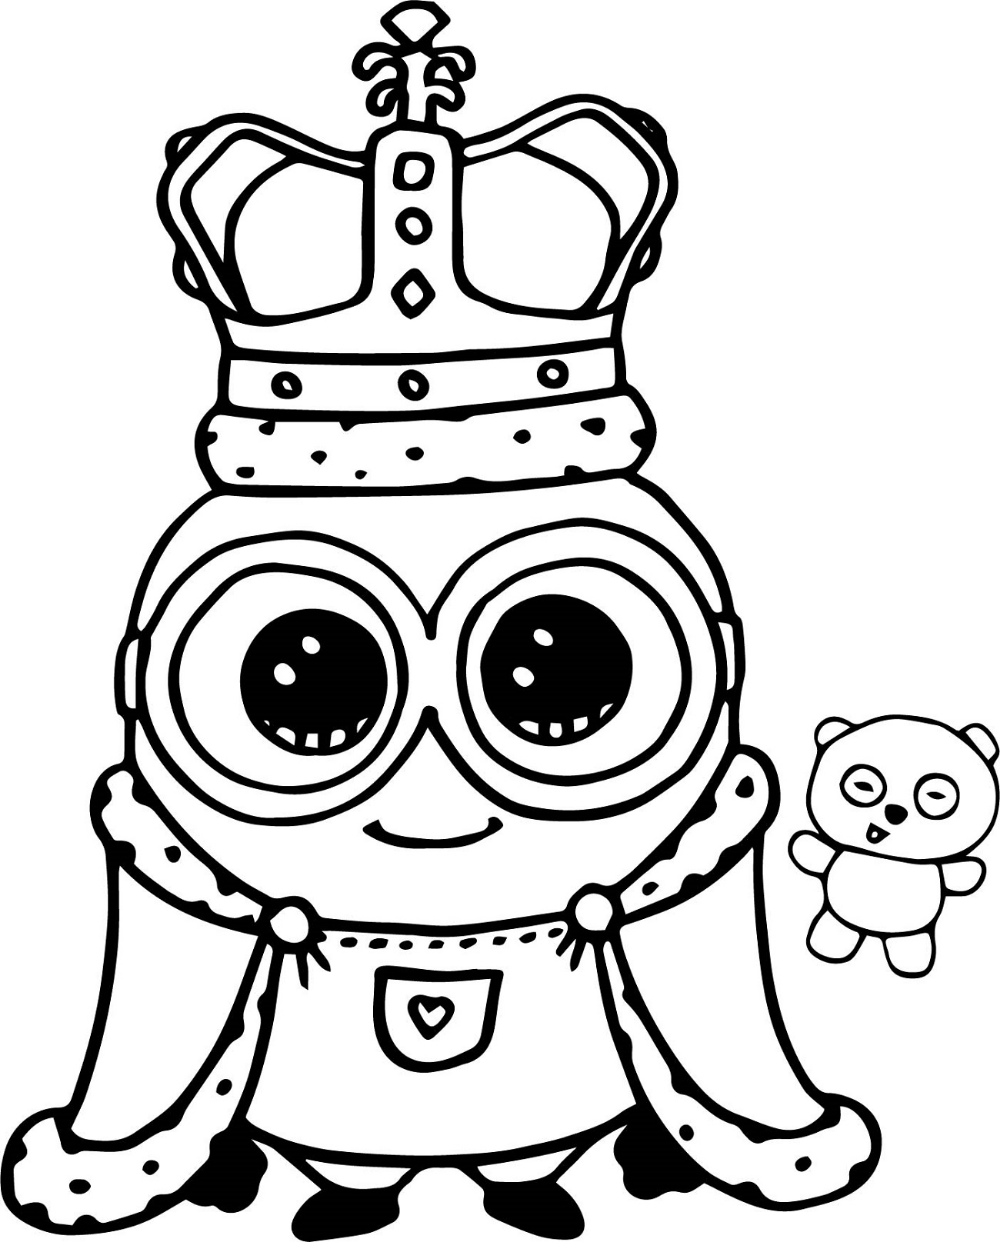 Minion king coloring pages for kids k worksheets minions coloring pages minion coloring pages pokemon coloring pages